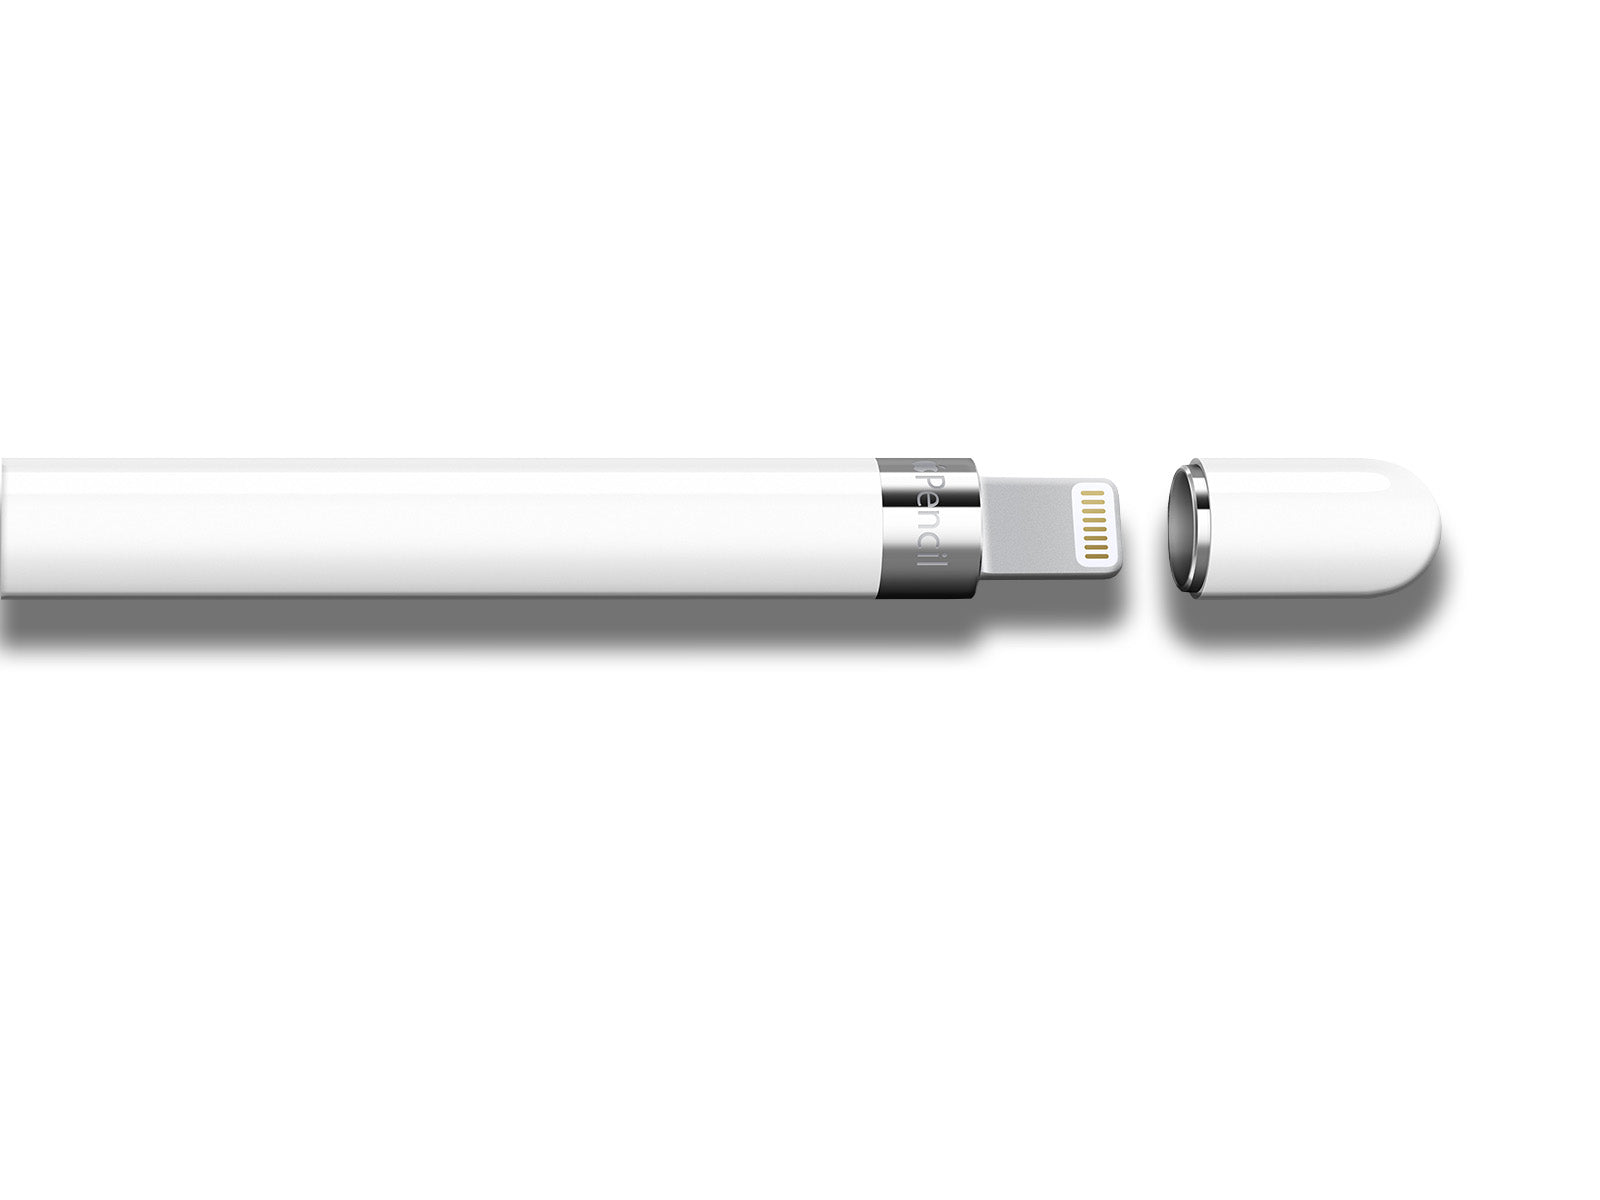 Apple Pencil 1st Generation With Lightning Adapter